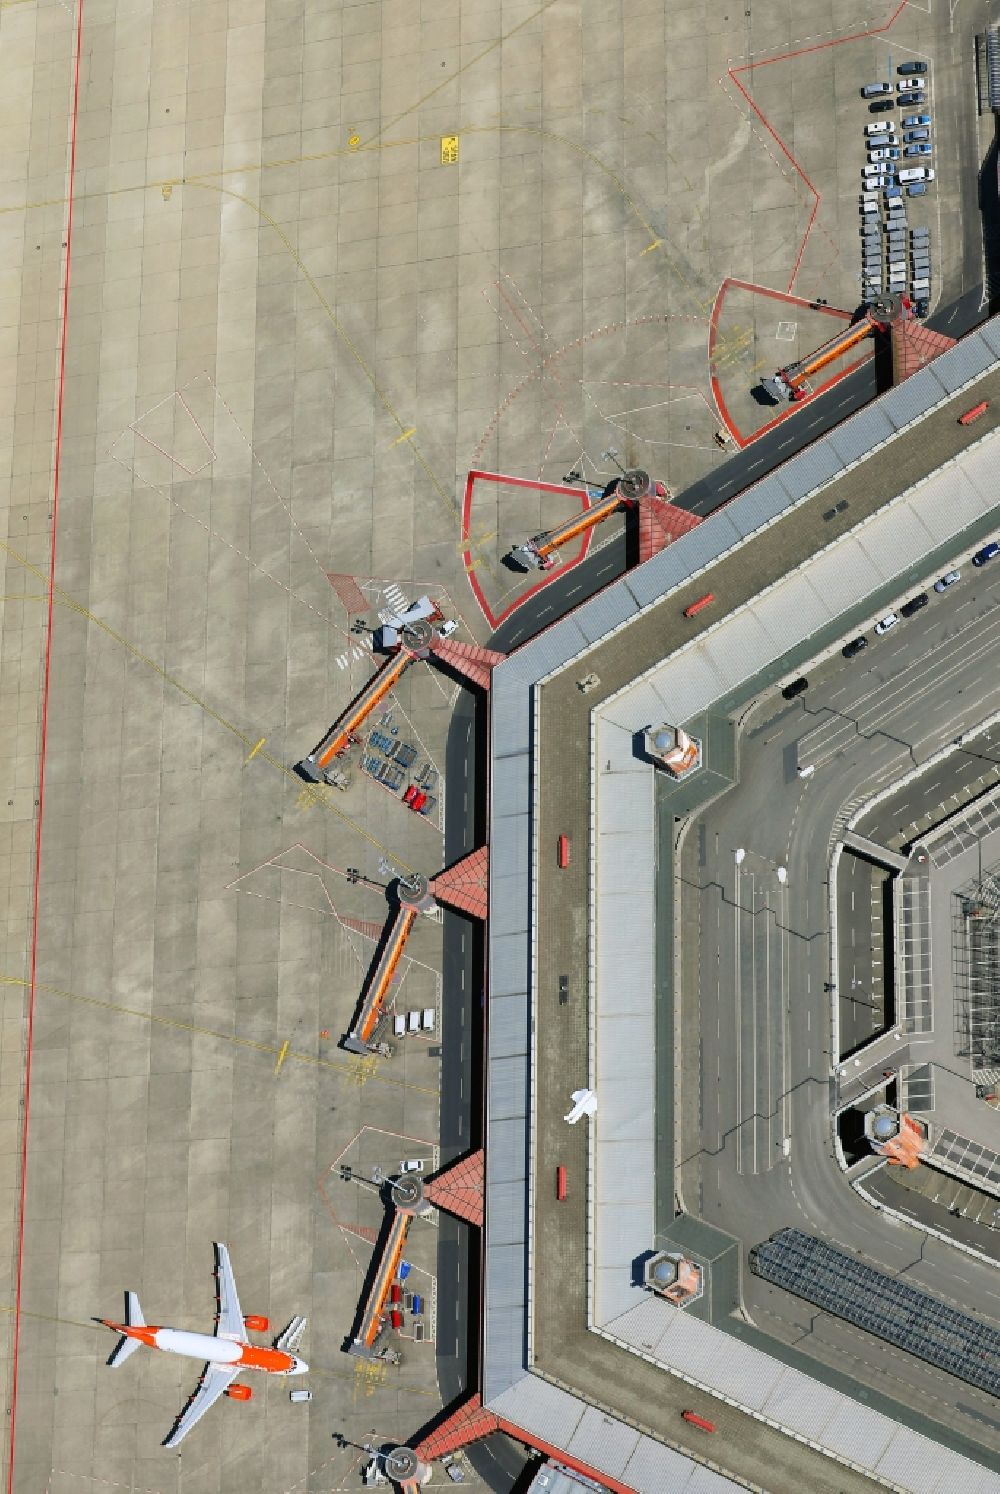 Berlin from the bird's eye view: Flight operations at the terminal of the airport Berlin - Tegel